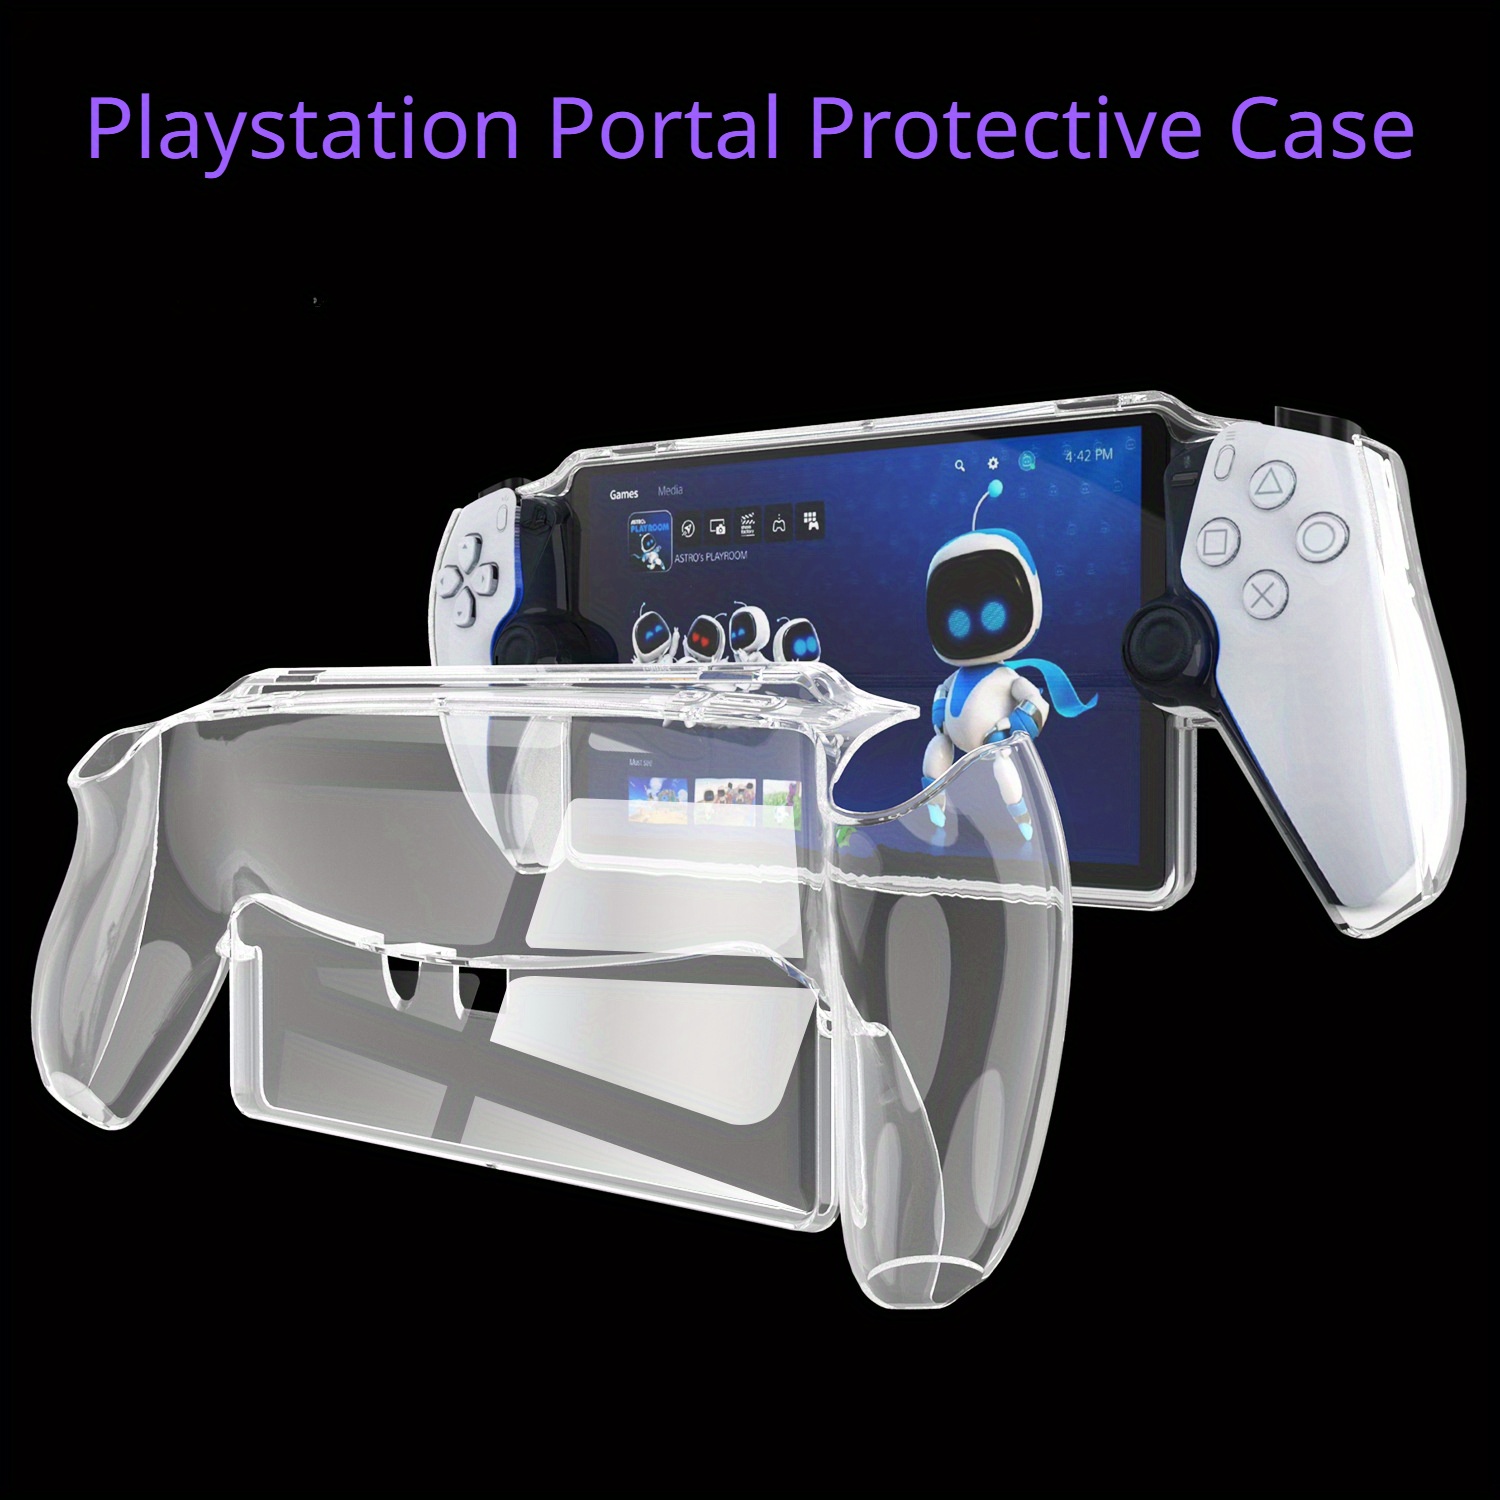 Shockproof Handheld Console Case Protective Shell for PlayStation